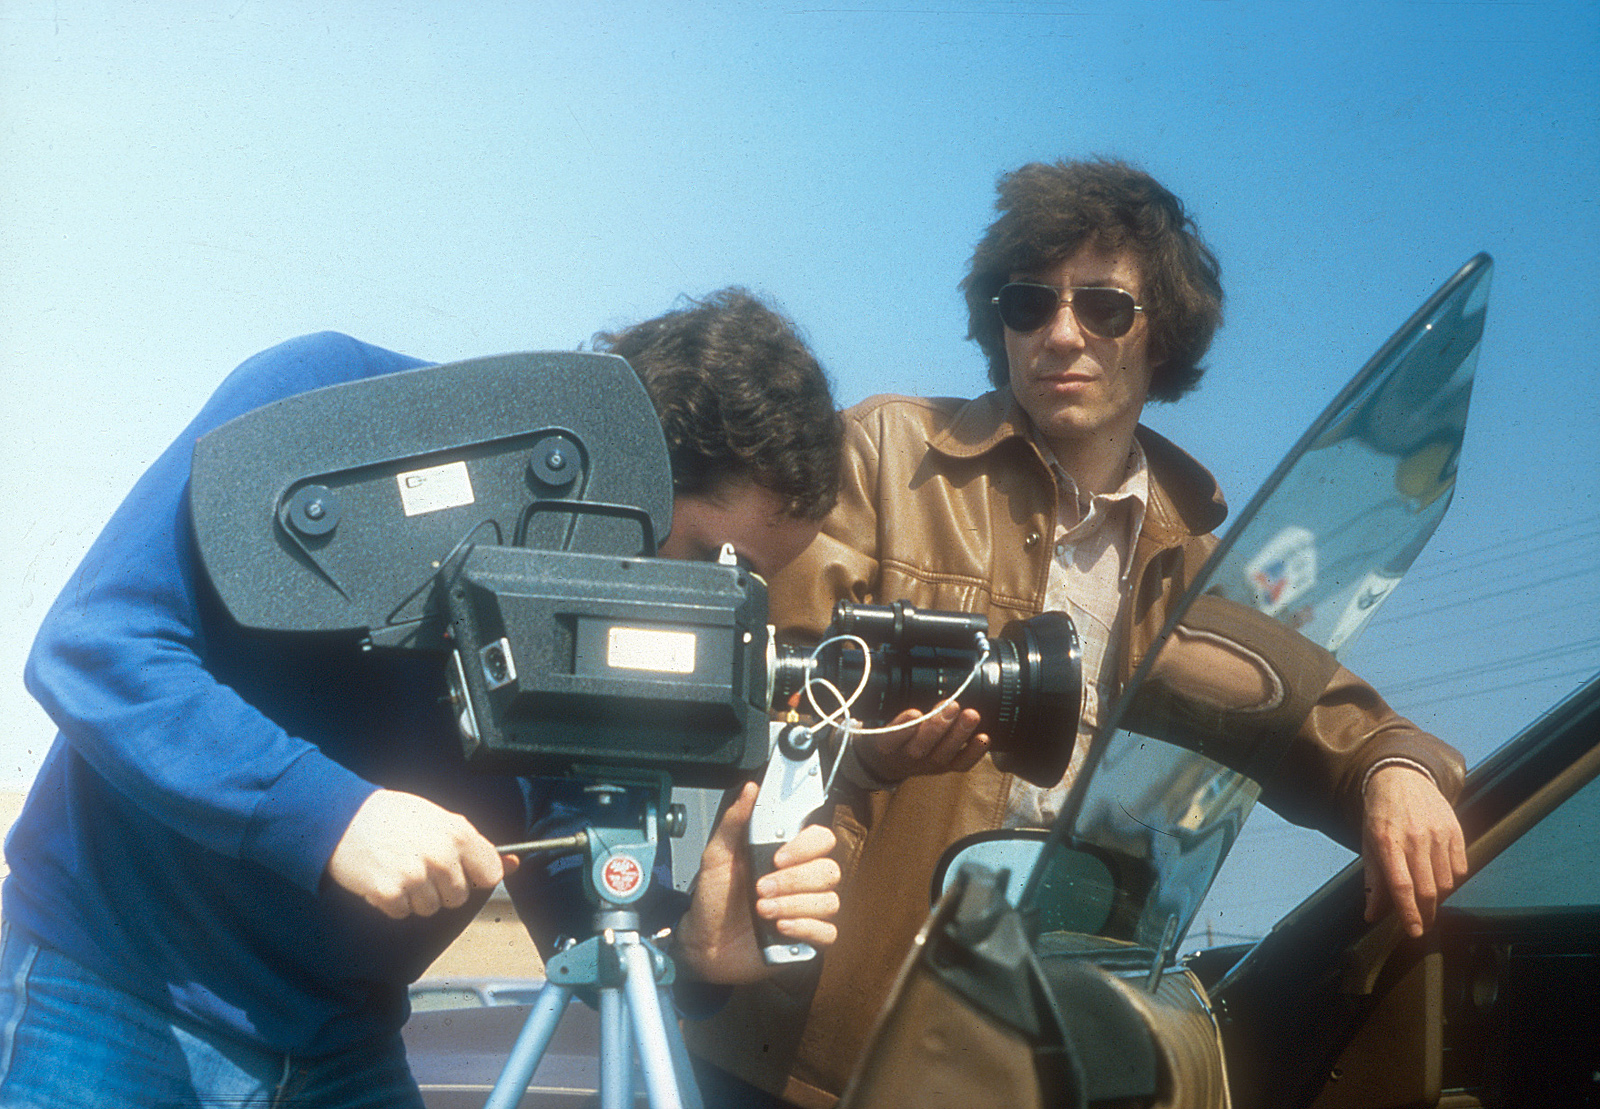 Don with director of photography Richard Geiwitz on the set of "Fiend" in 1980.